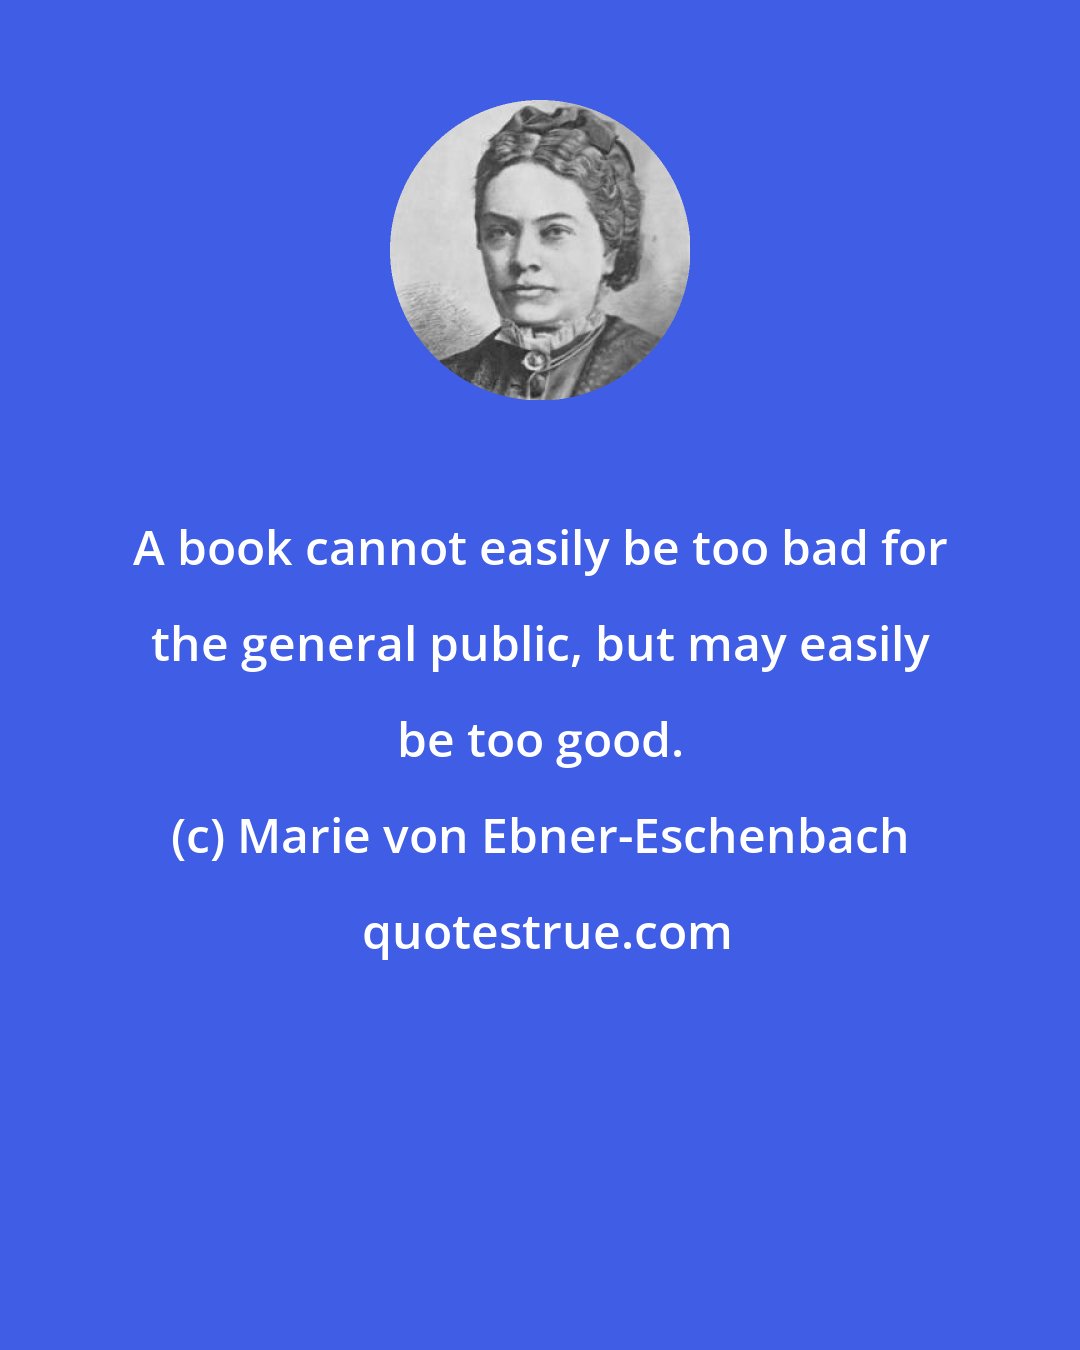 Marie von Ebner-Eschenbach: A book cannot easily be too bad for the general public, but may easily be too good.